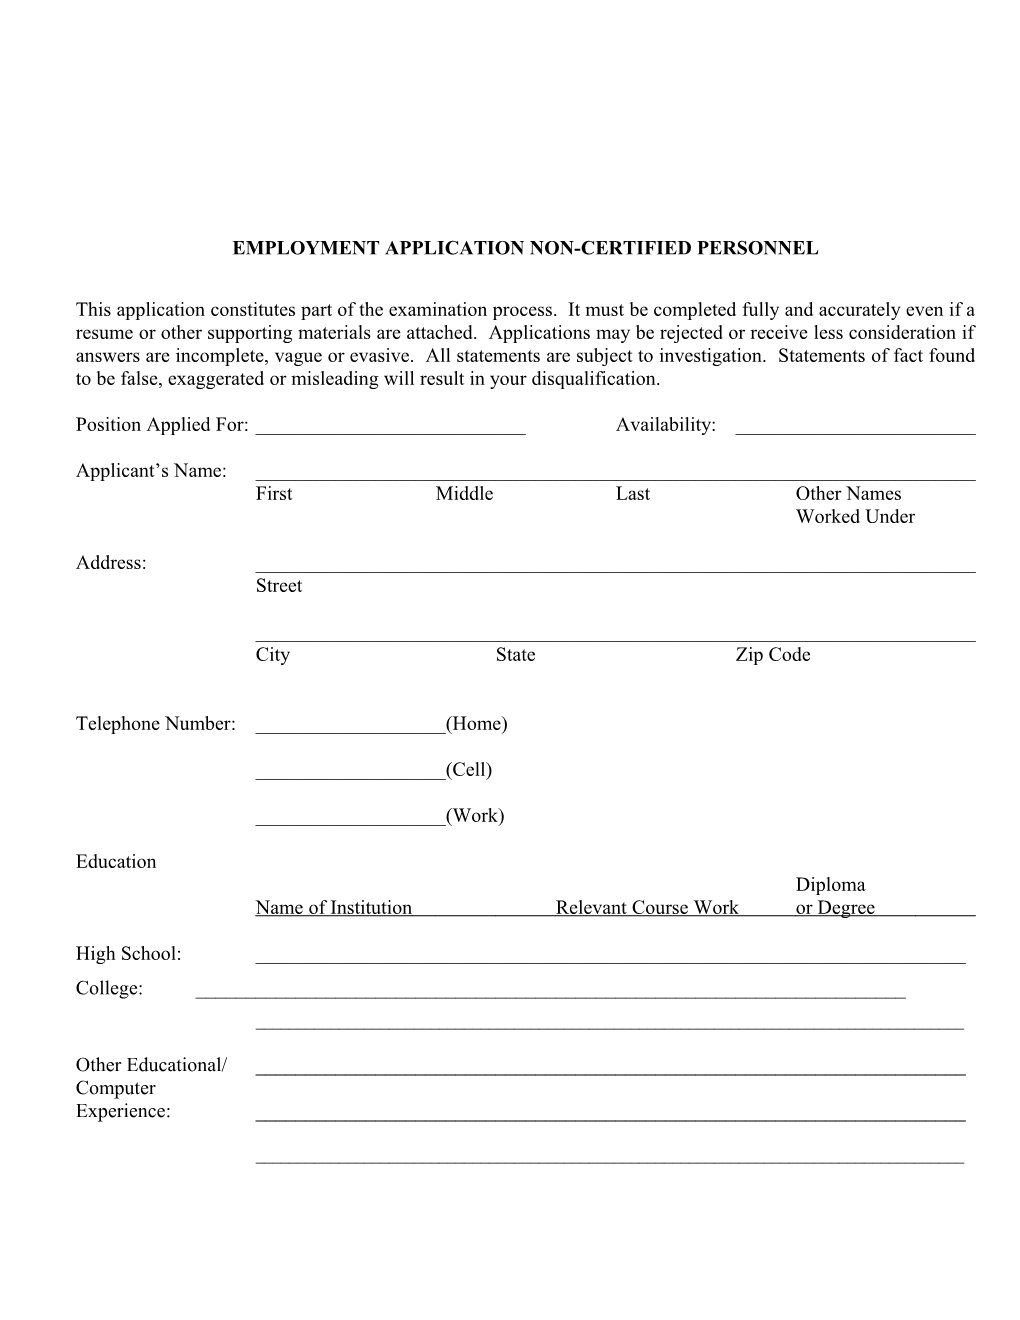 Employment Application Non-Certified Personnel